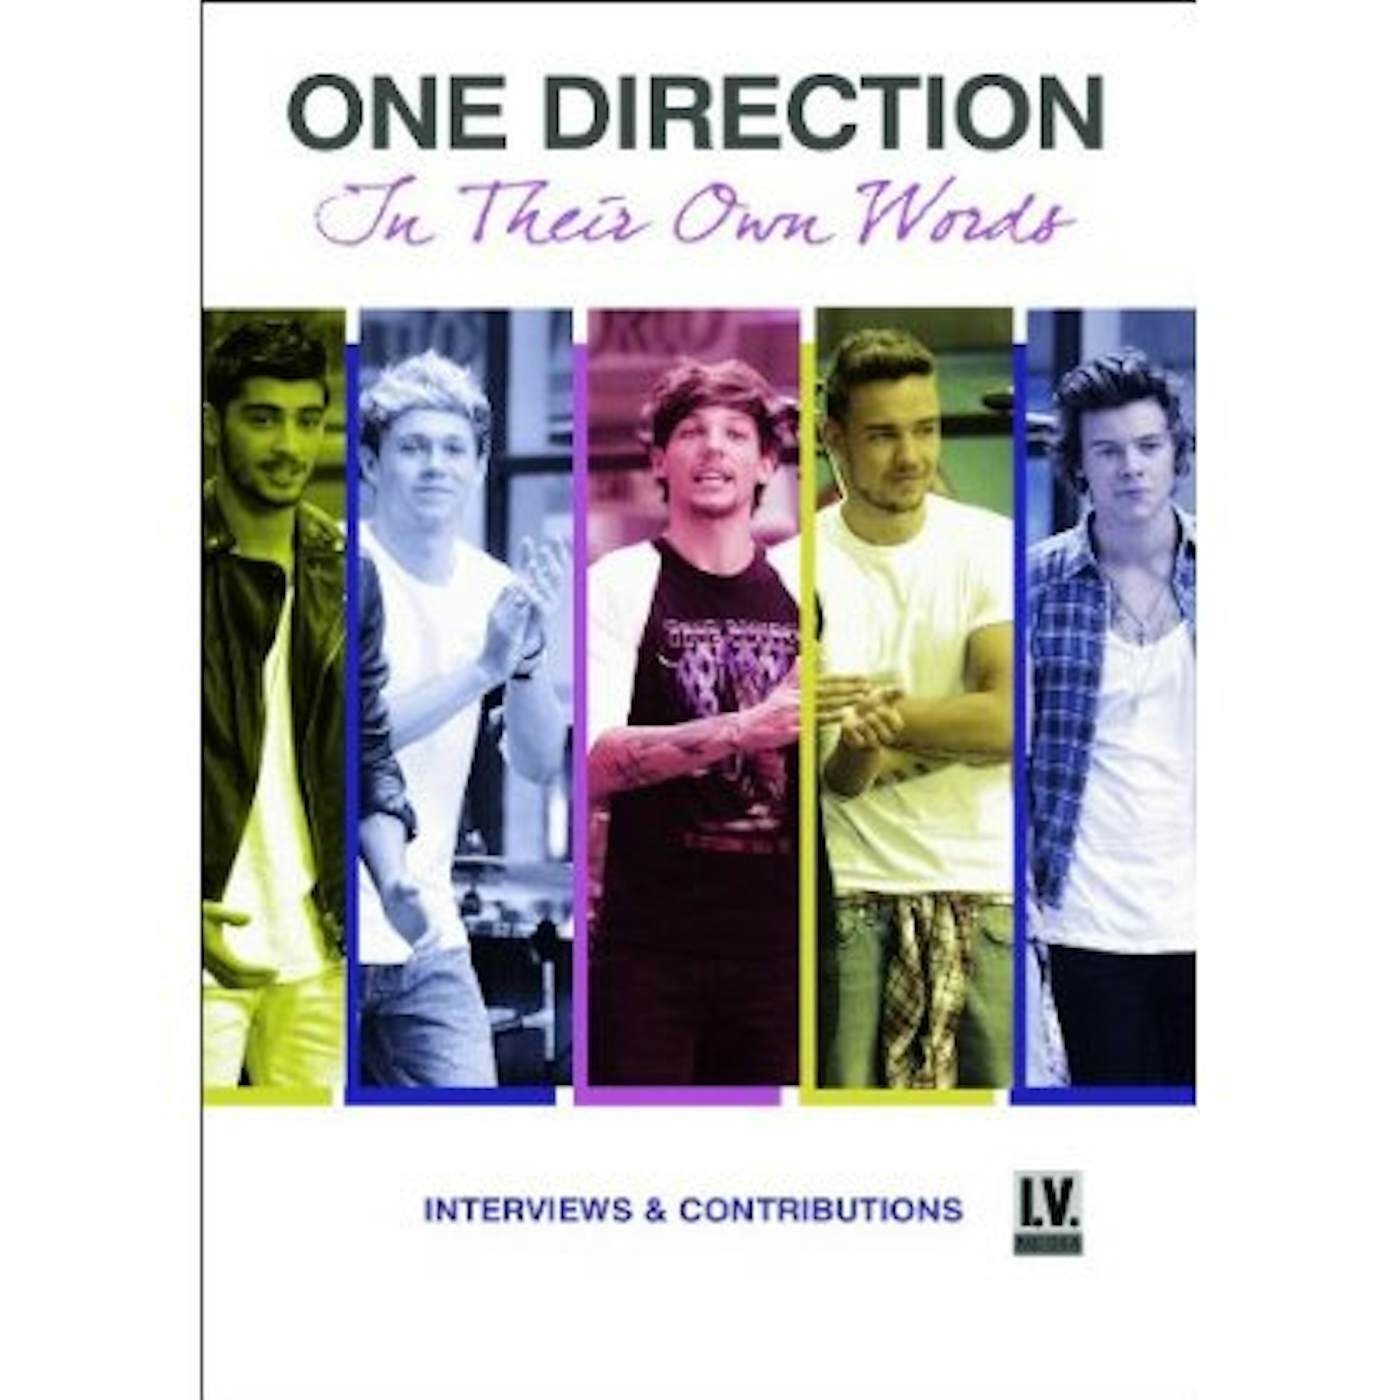 One Direction IN THEIR OWN WORDS DVD